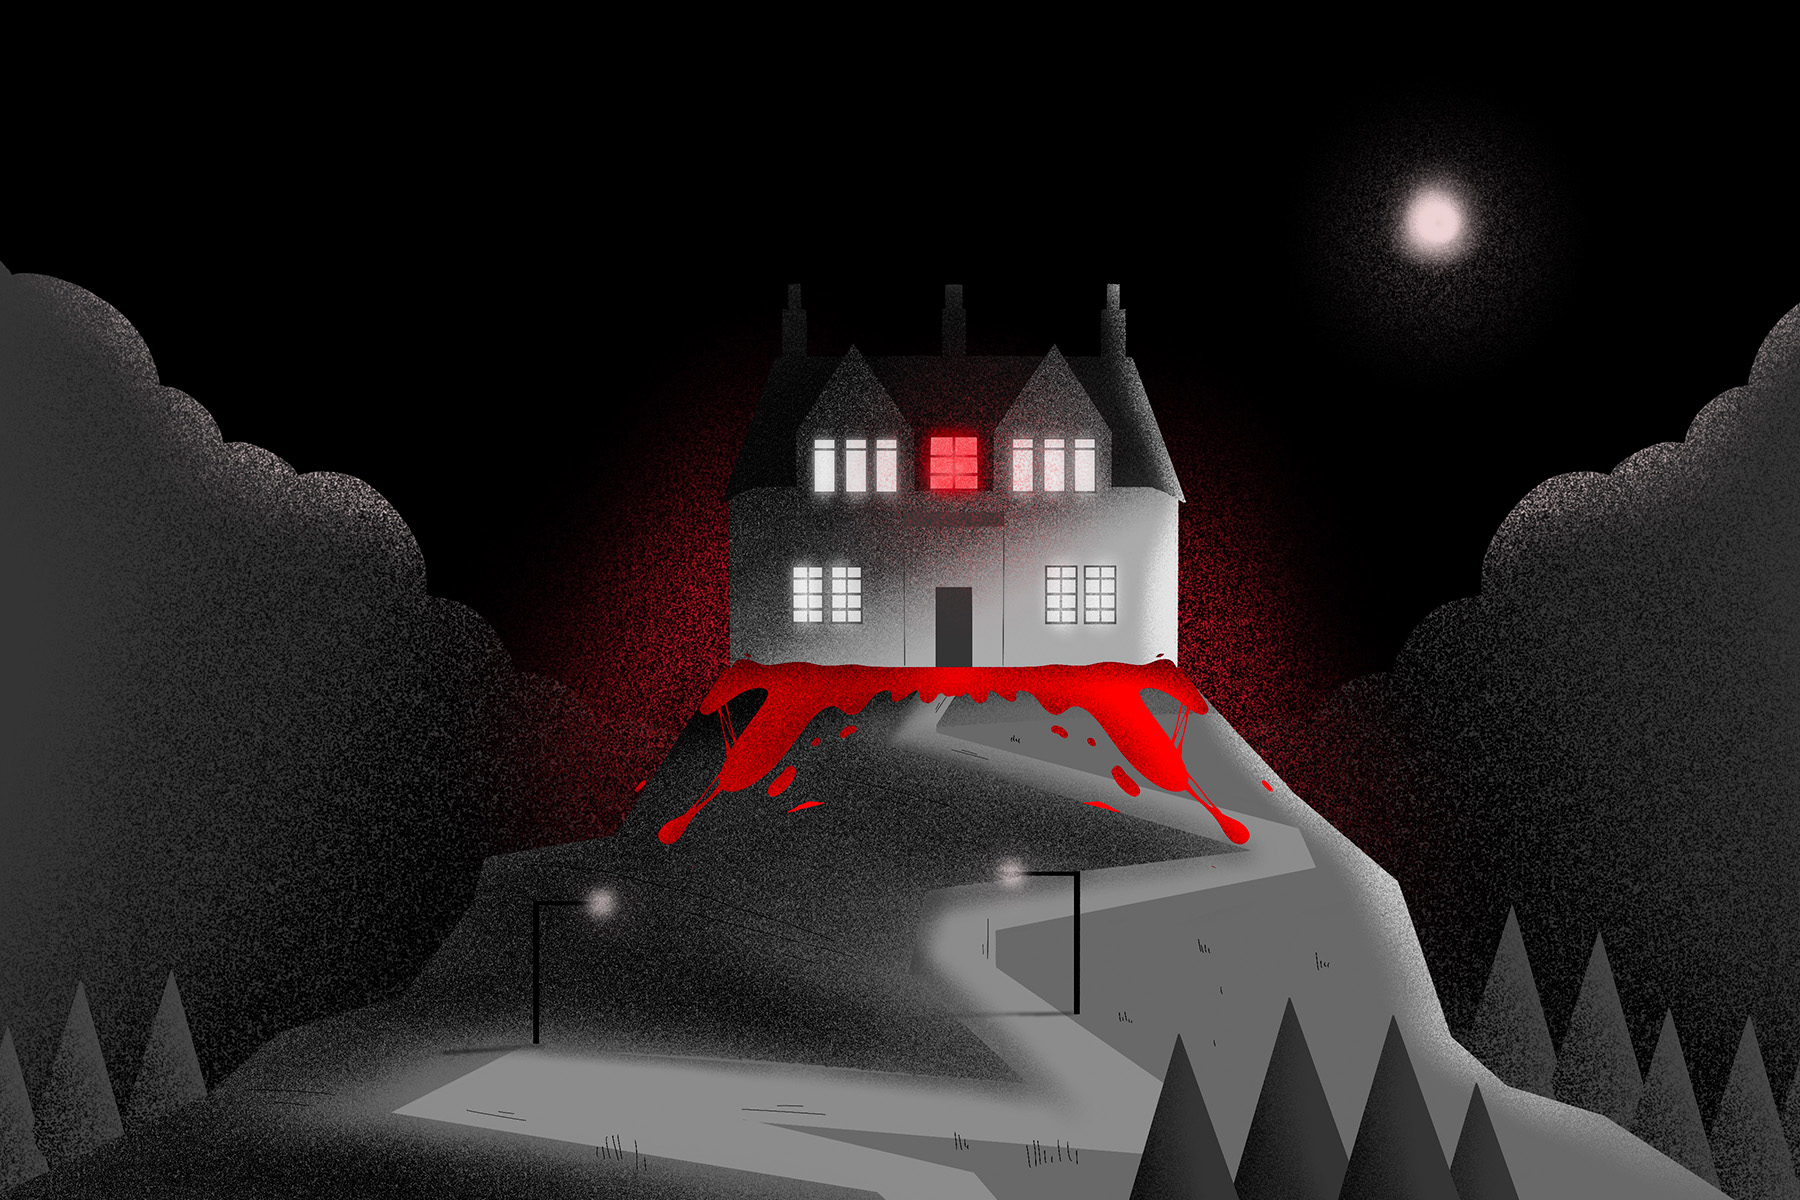 An illustration of a house atop a hill, the windows lit up, all in grayscale except for the blood at the house’s base and a single red window.